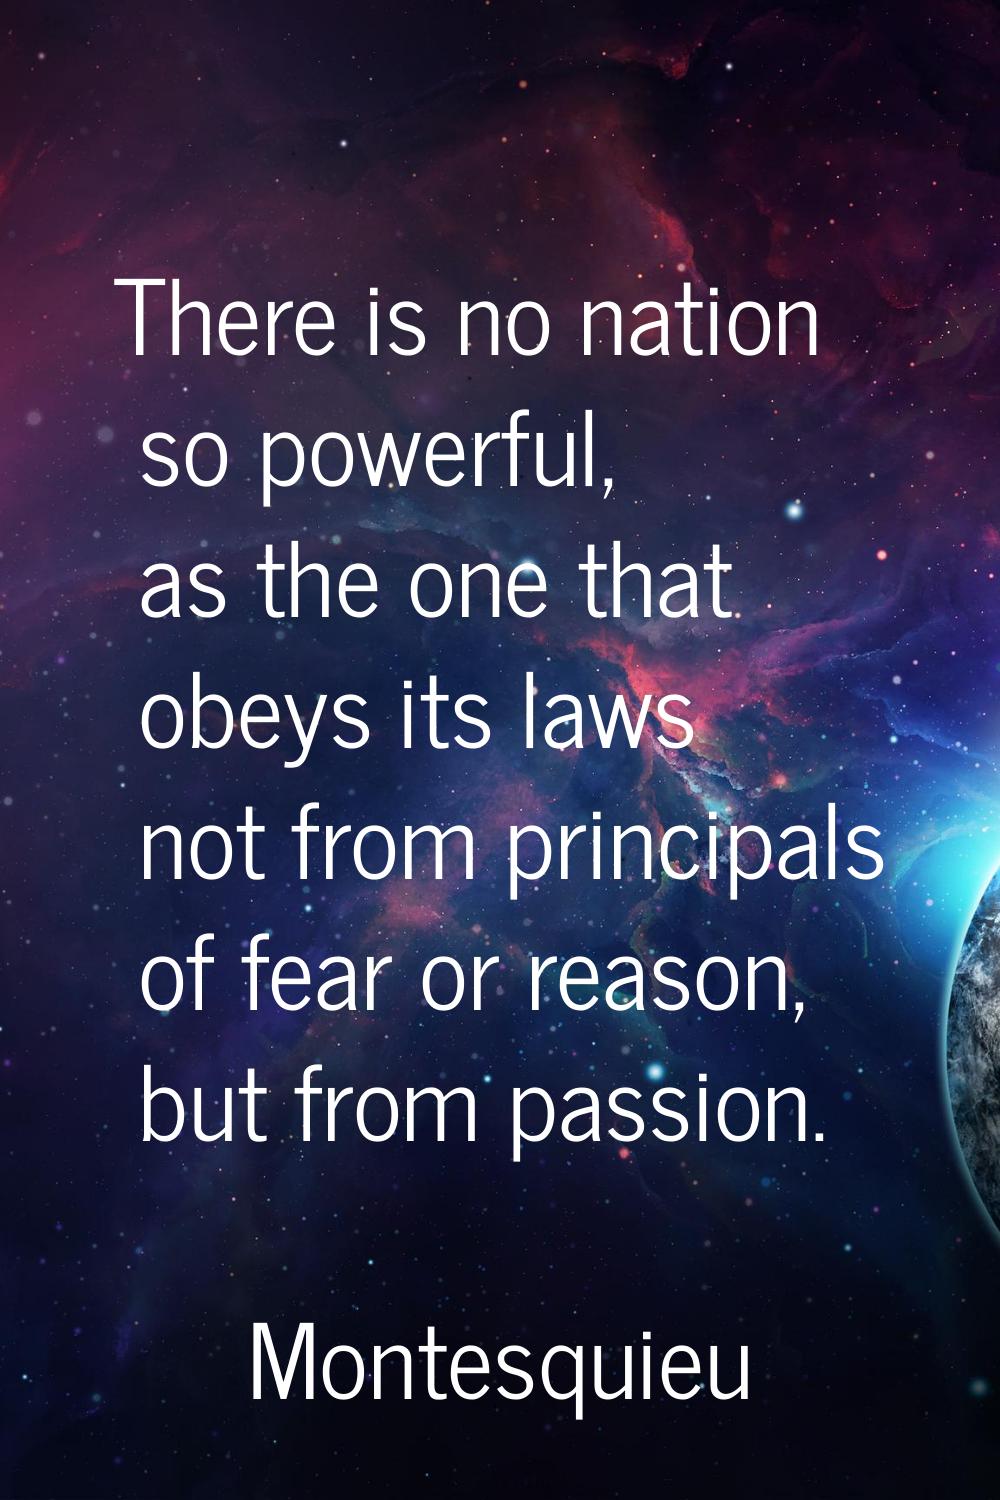 There is no nation so powerful, as the one that obeys its laws not from principals of fear or reaso